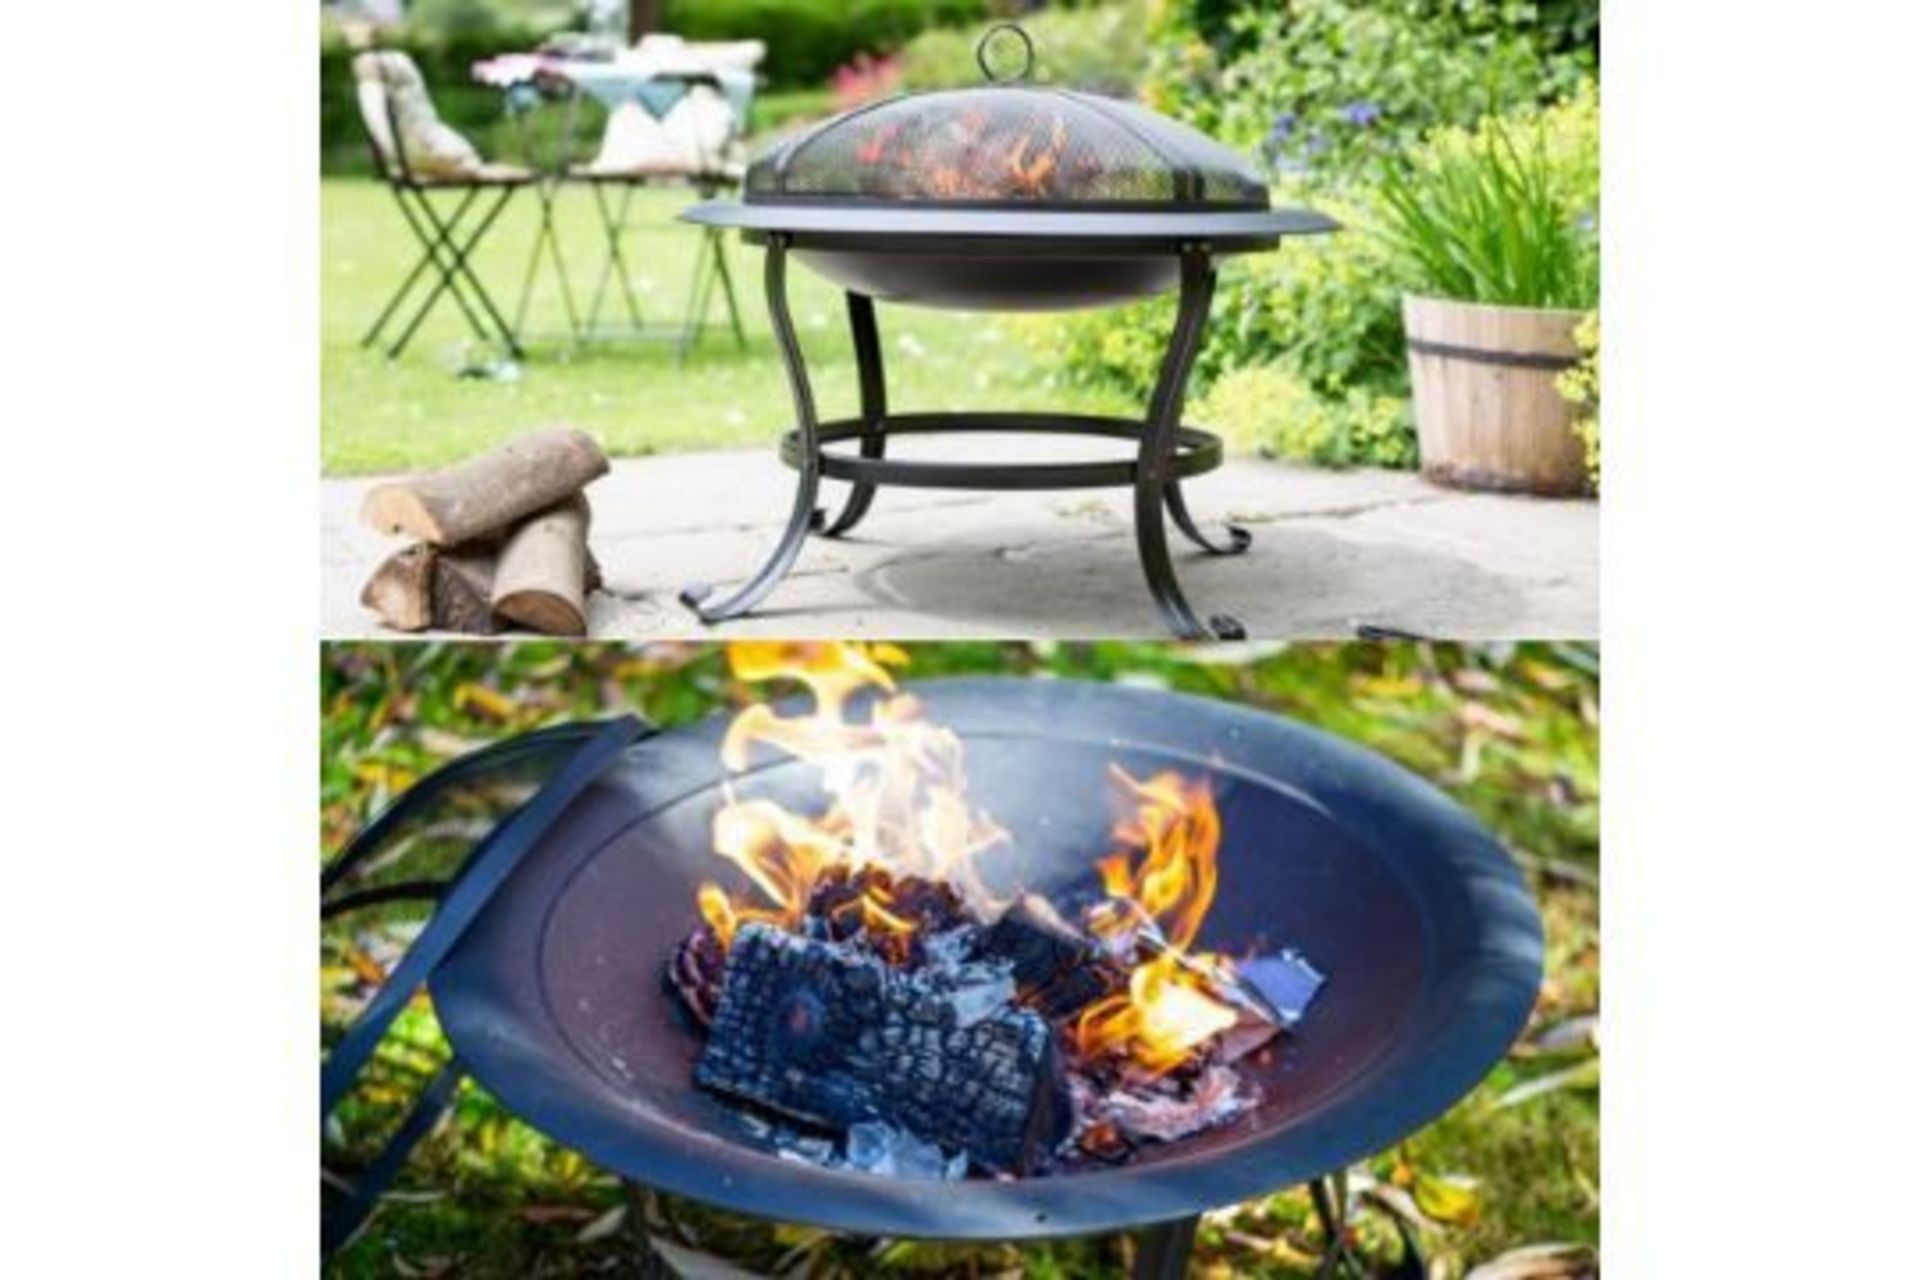 New Boxed STEEL FIRE PIT BOWL WITH MESH LID & COOKING GRILL. This stylish steel fire pit bowl - Image 2 of 2